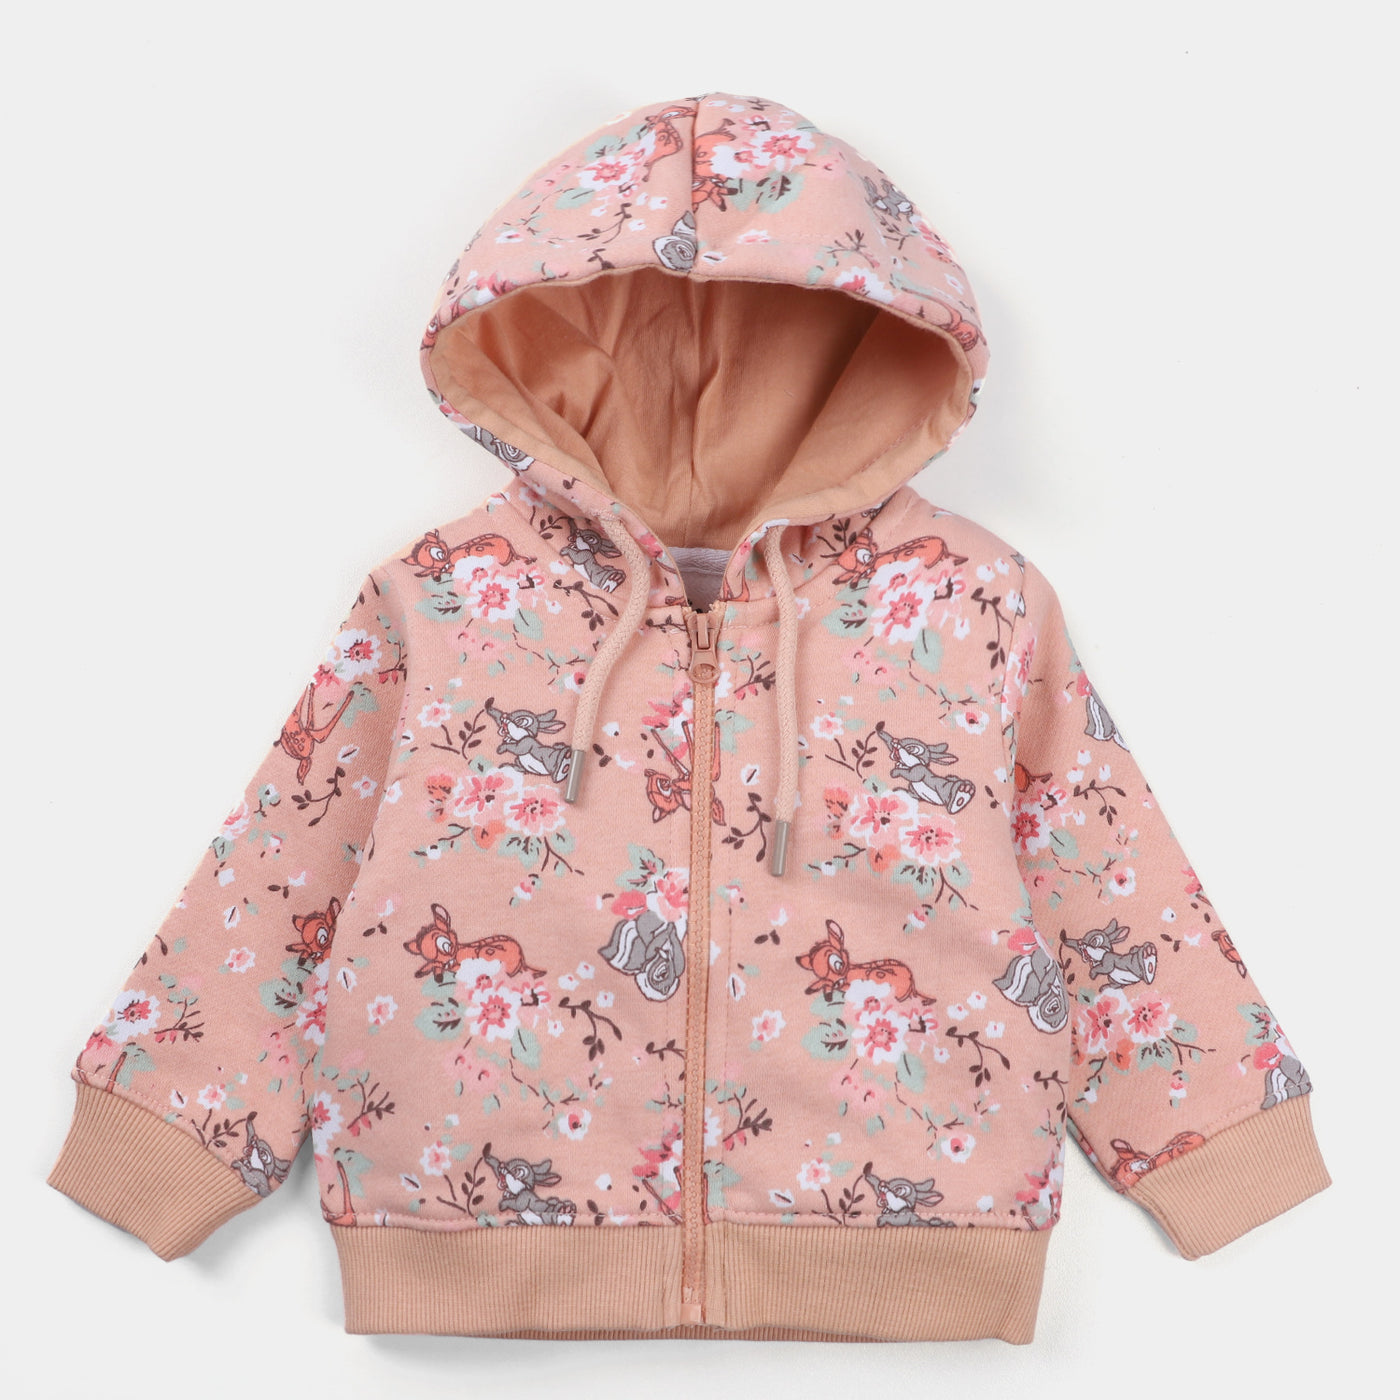 Infant Girls Fleece Knitted Jacket CHARACTER -APRICOT